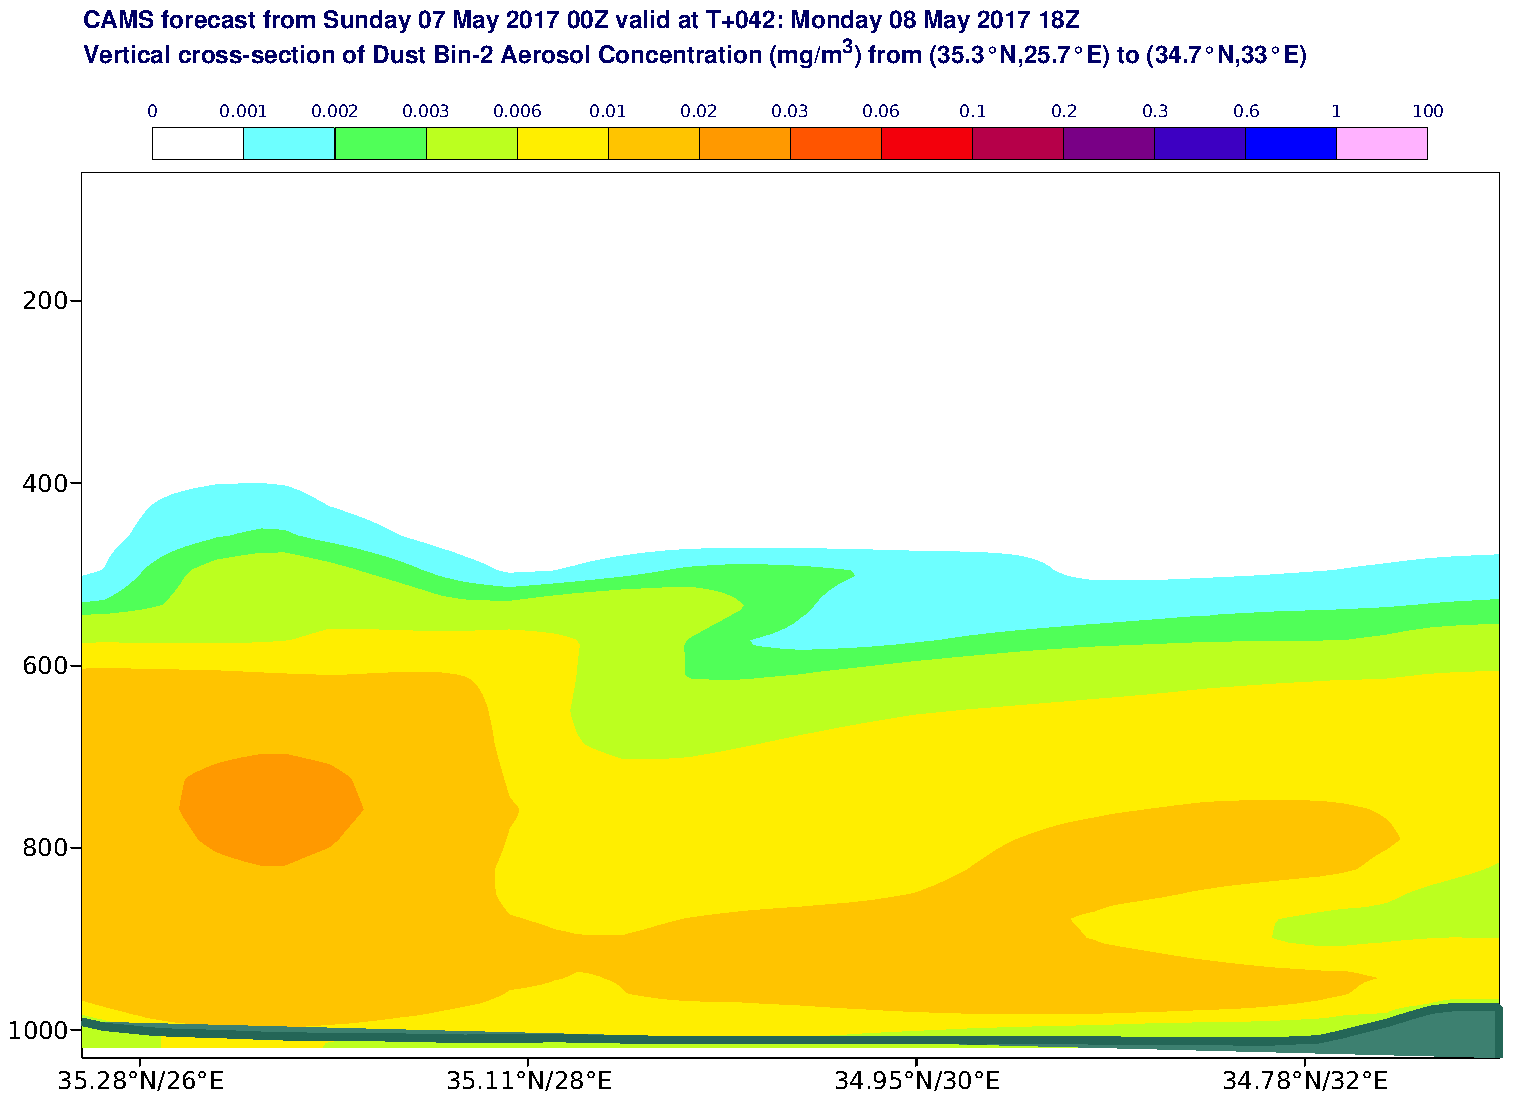 Vertical cross-section of Dust Bin-2 Aerosol Concentration (mg/m3) valid at T42 - 2017-05-08 18:00